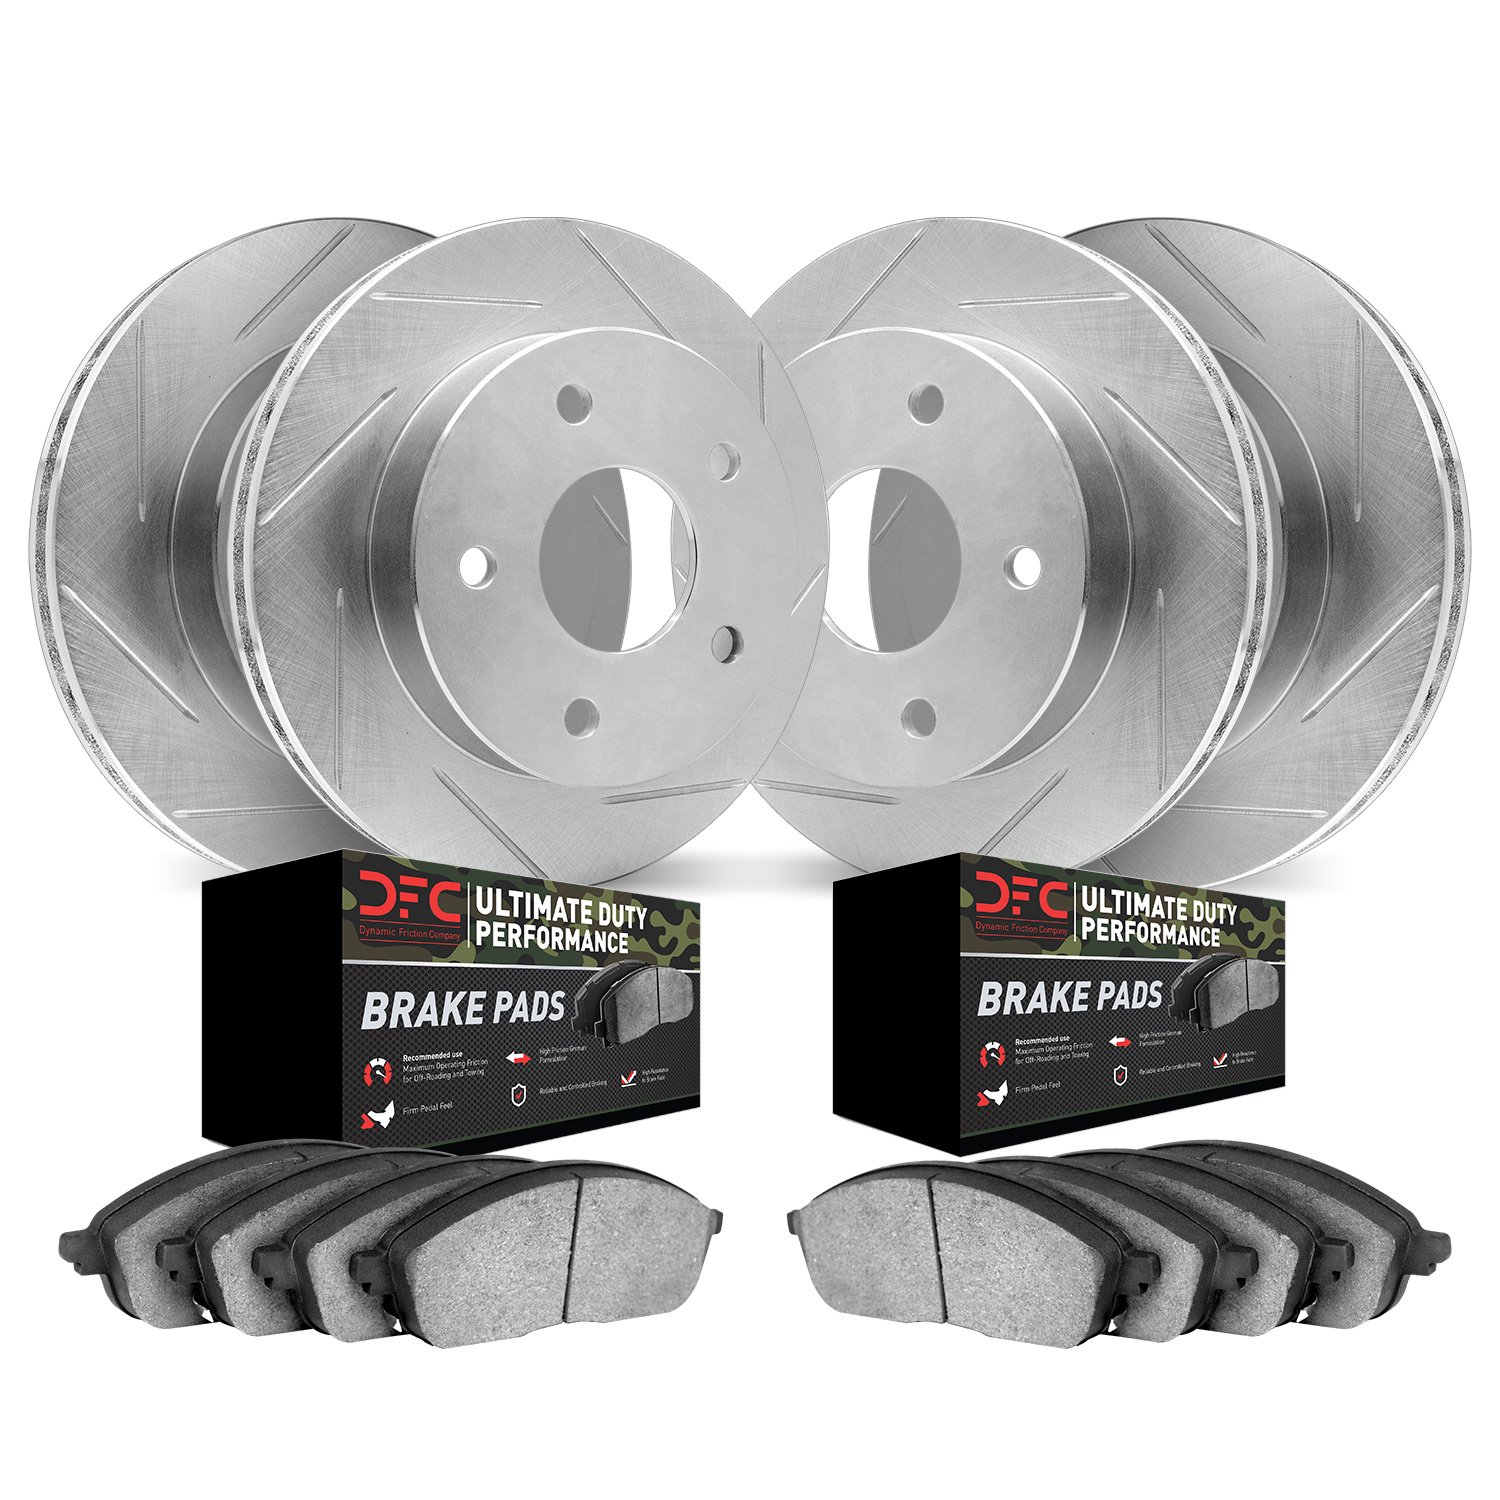 2404-48000 Geoperformance Slotted Brake Rotors with Ultimate-Duty Brake Pads Kit, 1997-2005 GM, Position: Front and Rear